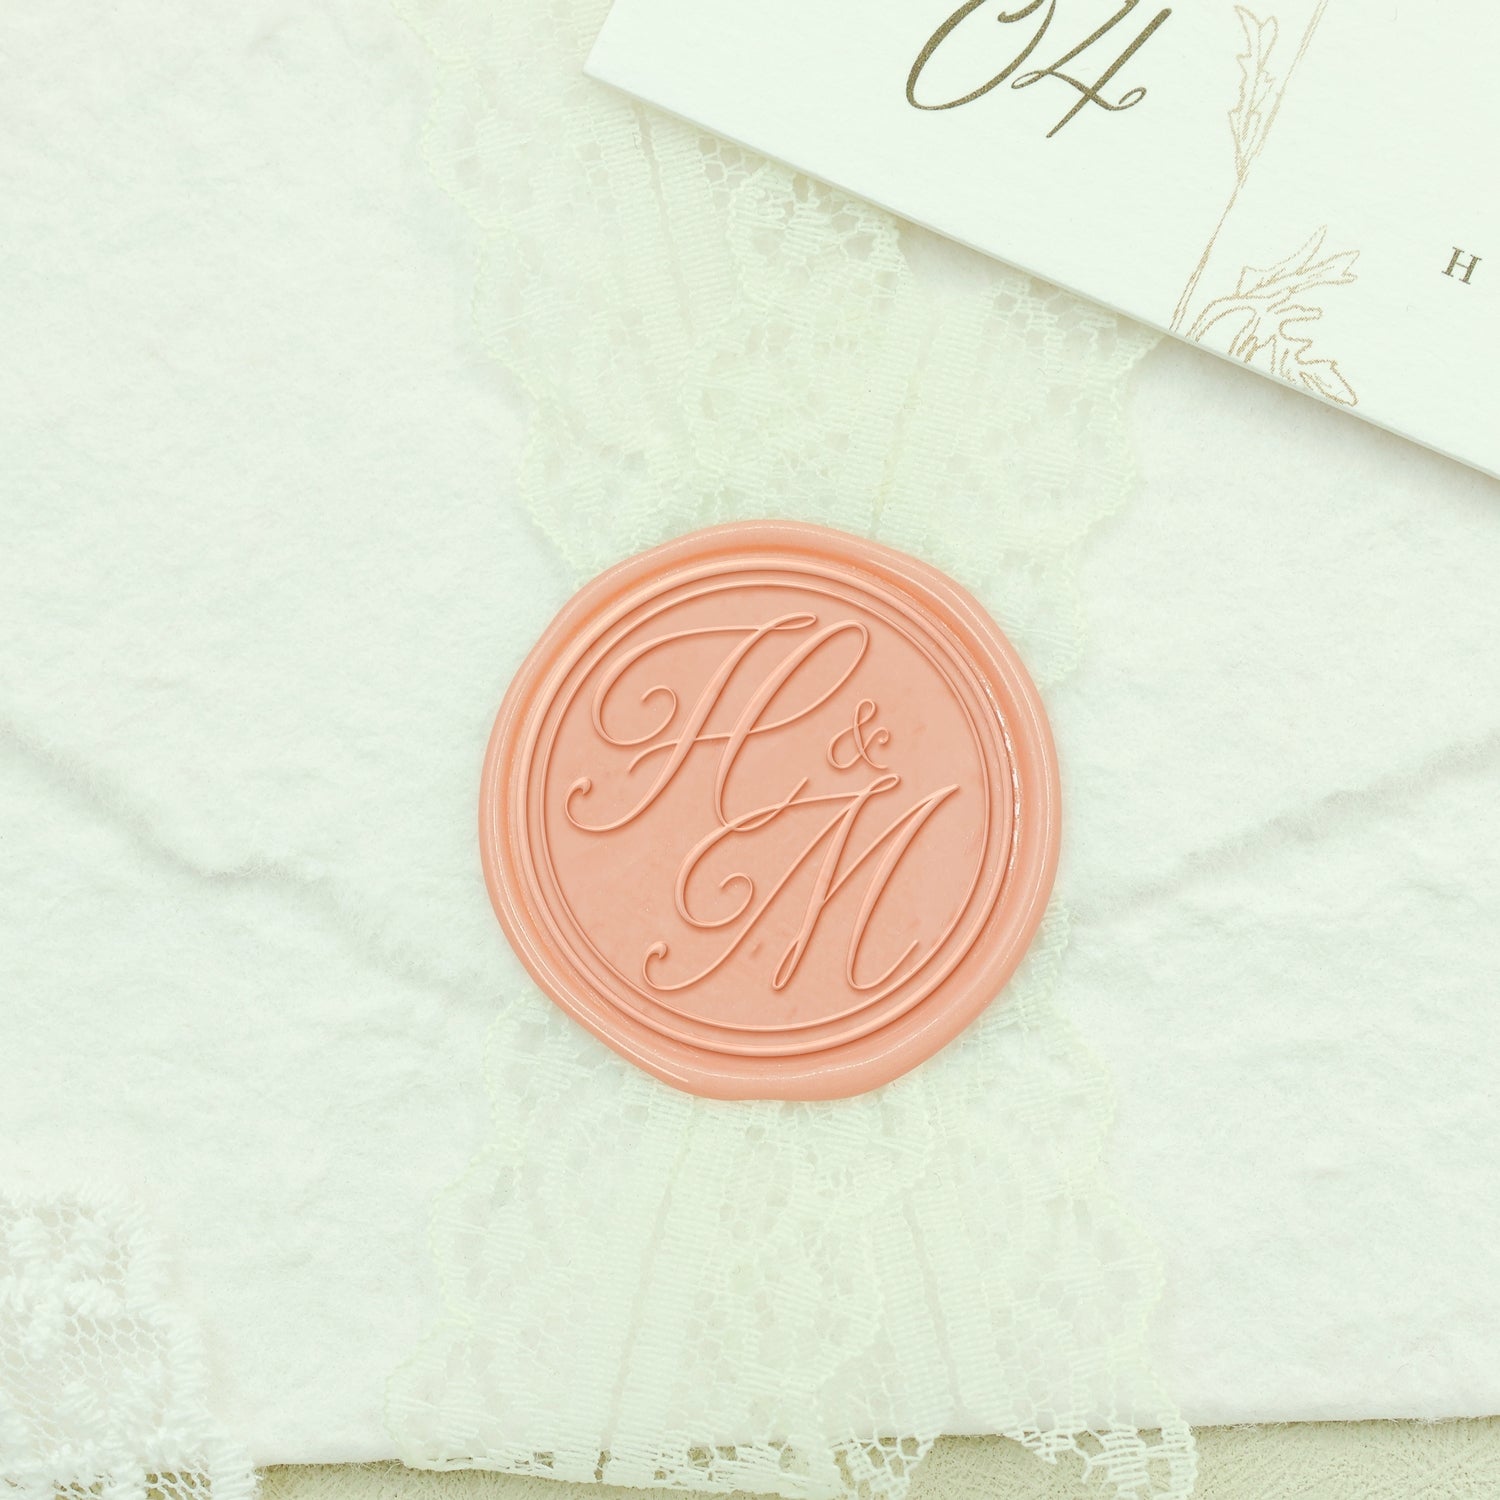 Rihao hand-engraved seal] Seal cutting - marriage seal, customized stamp,  seal seal - font example - Shop daysartscarveeeeeeee Stamps & Stamp Pads -  Pinkoi